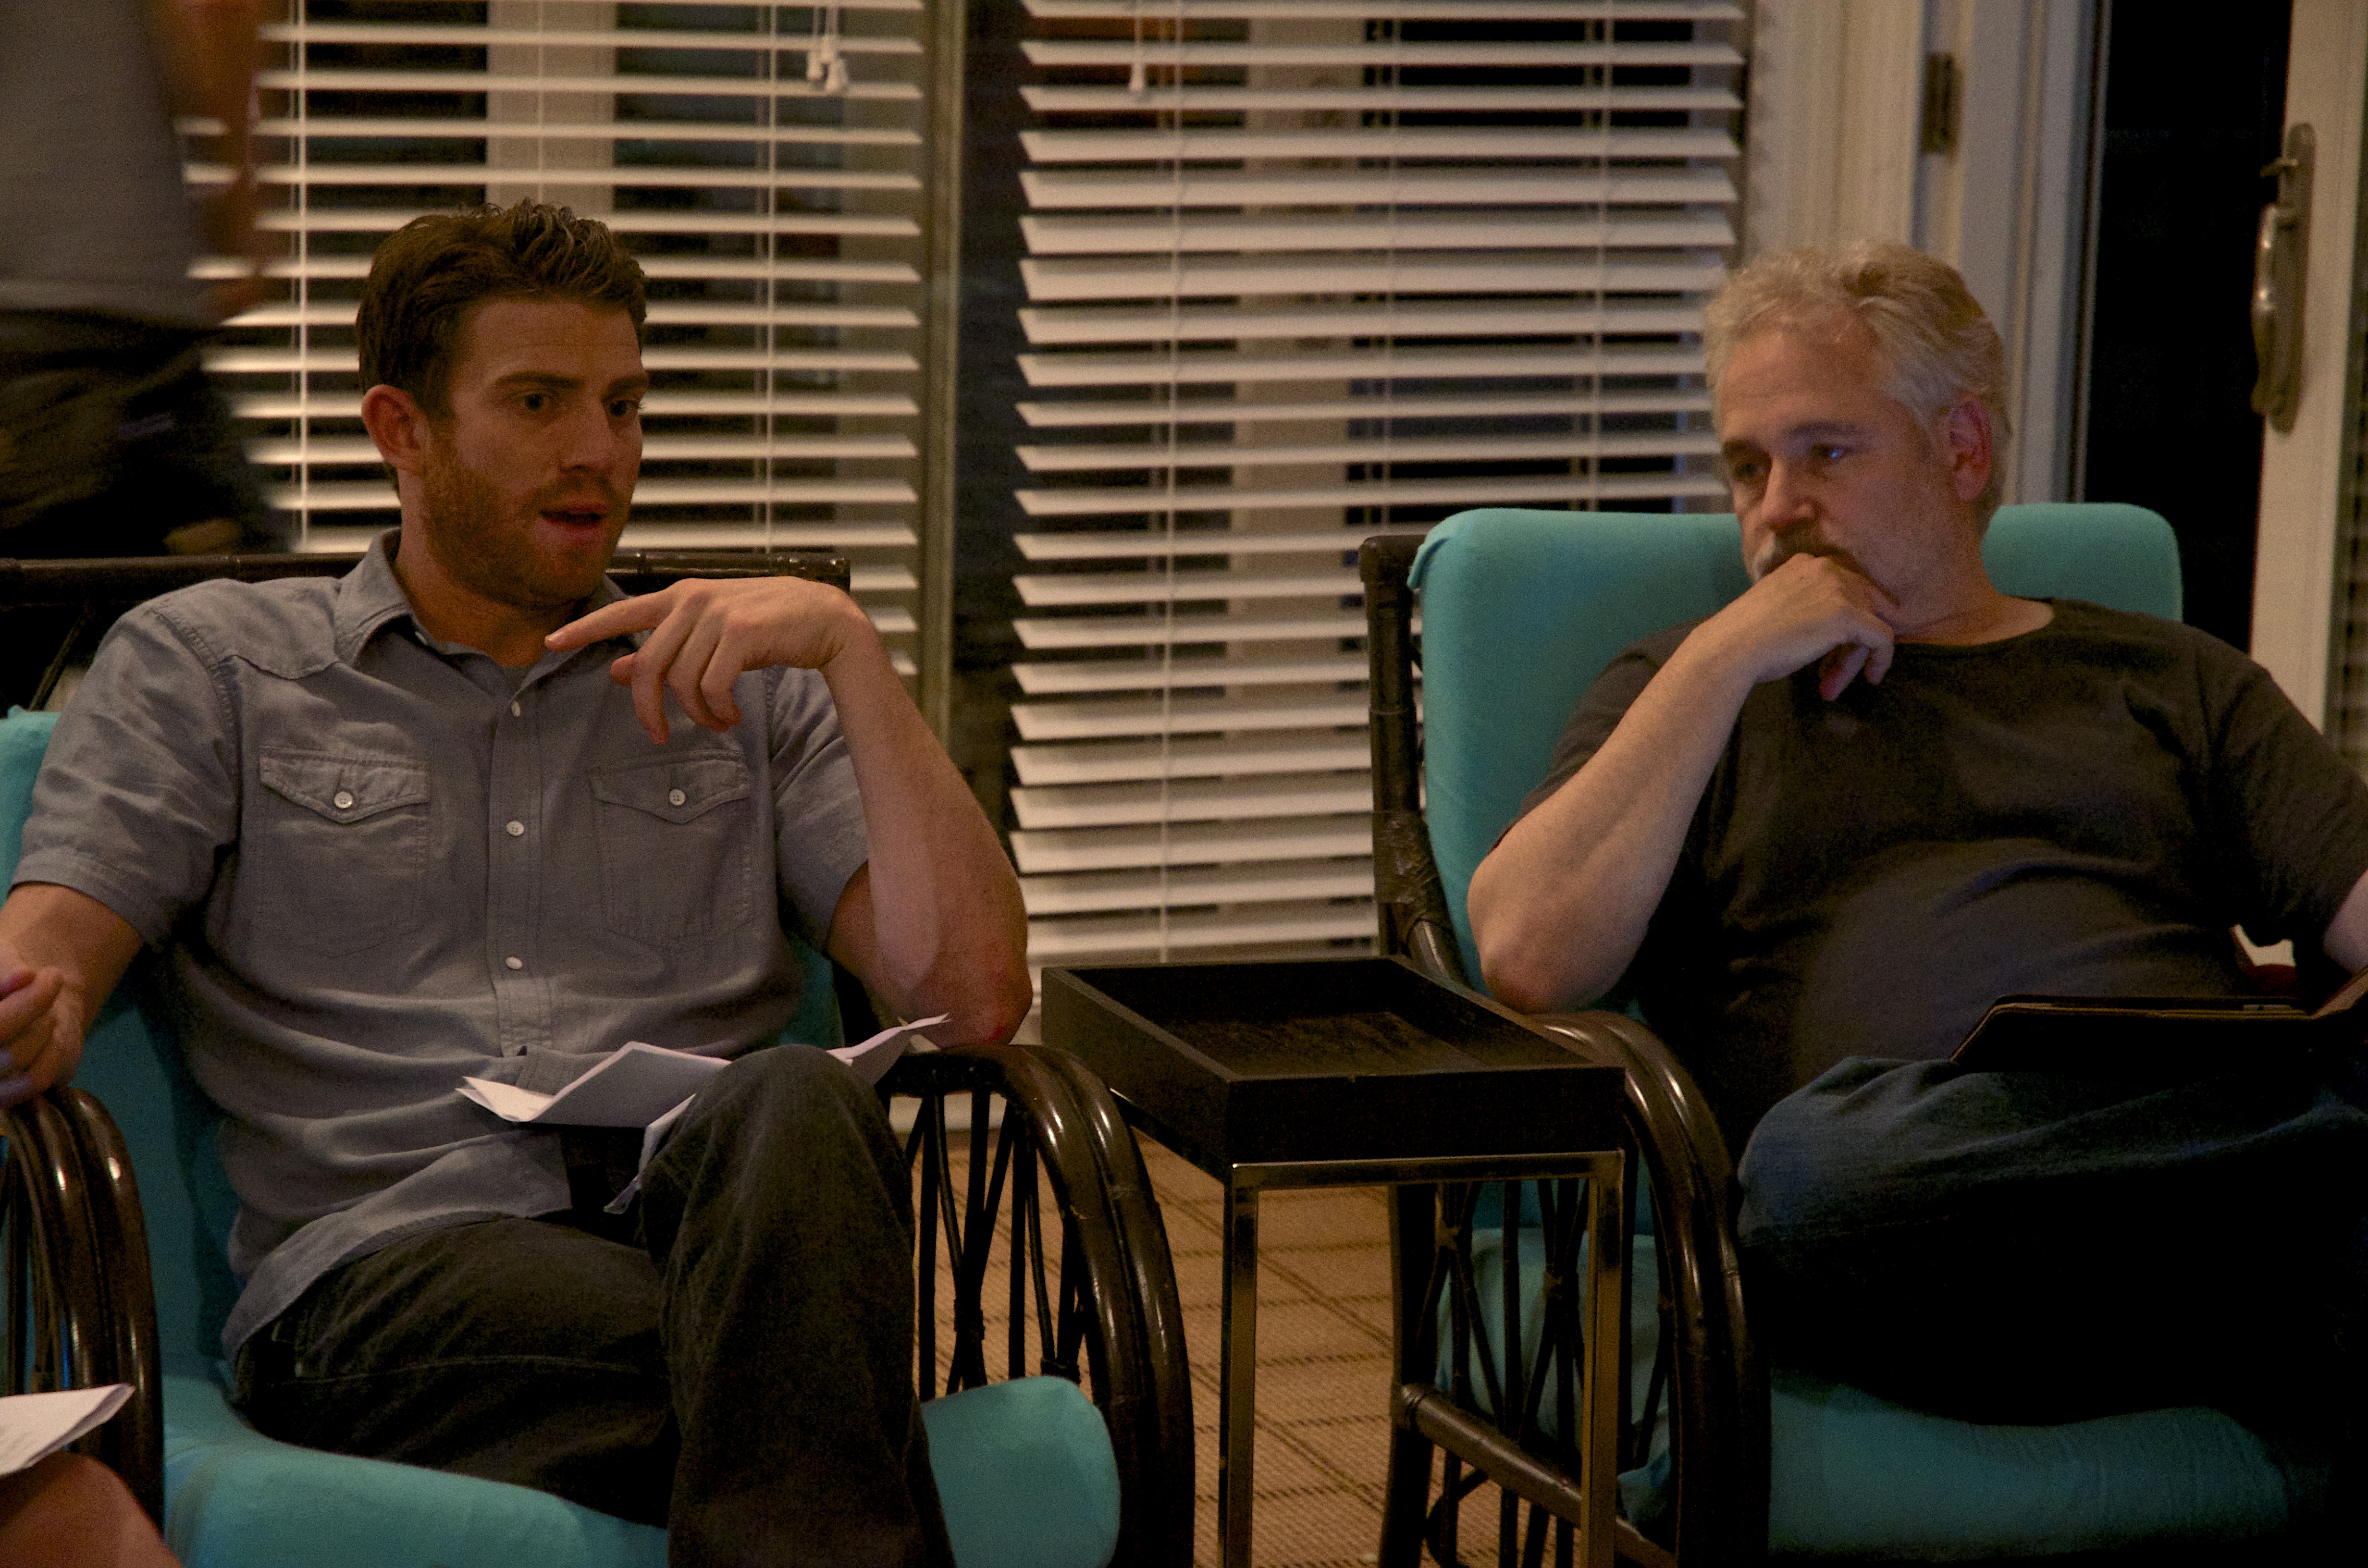 Bryan Greenberg & Michael Maren on the set of A Short History of Decay.